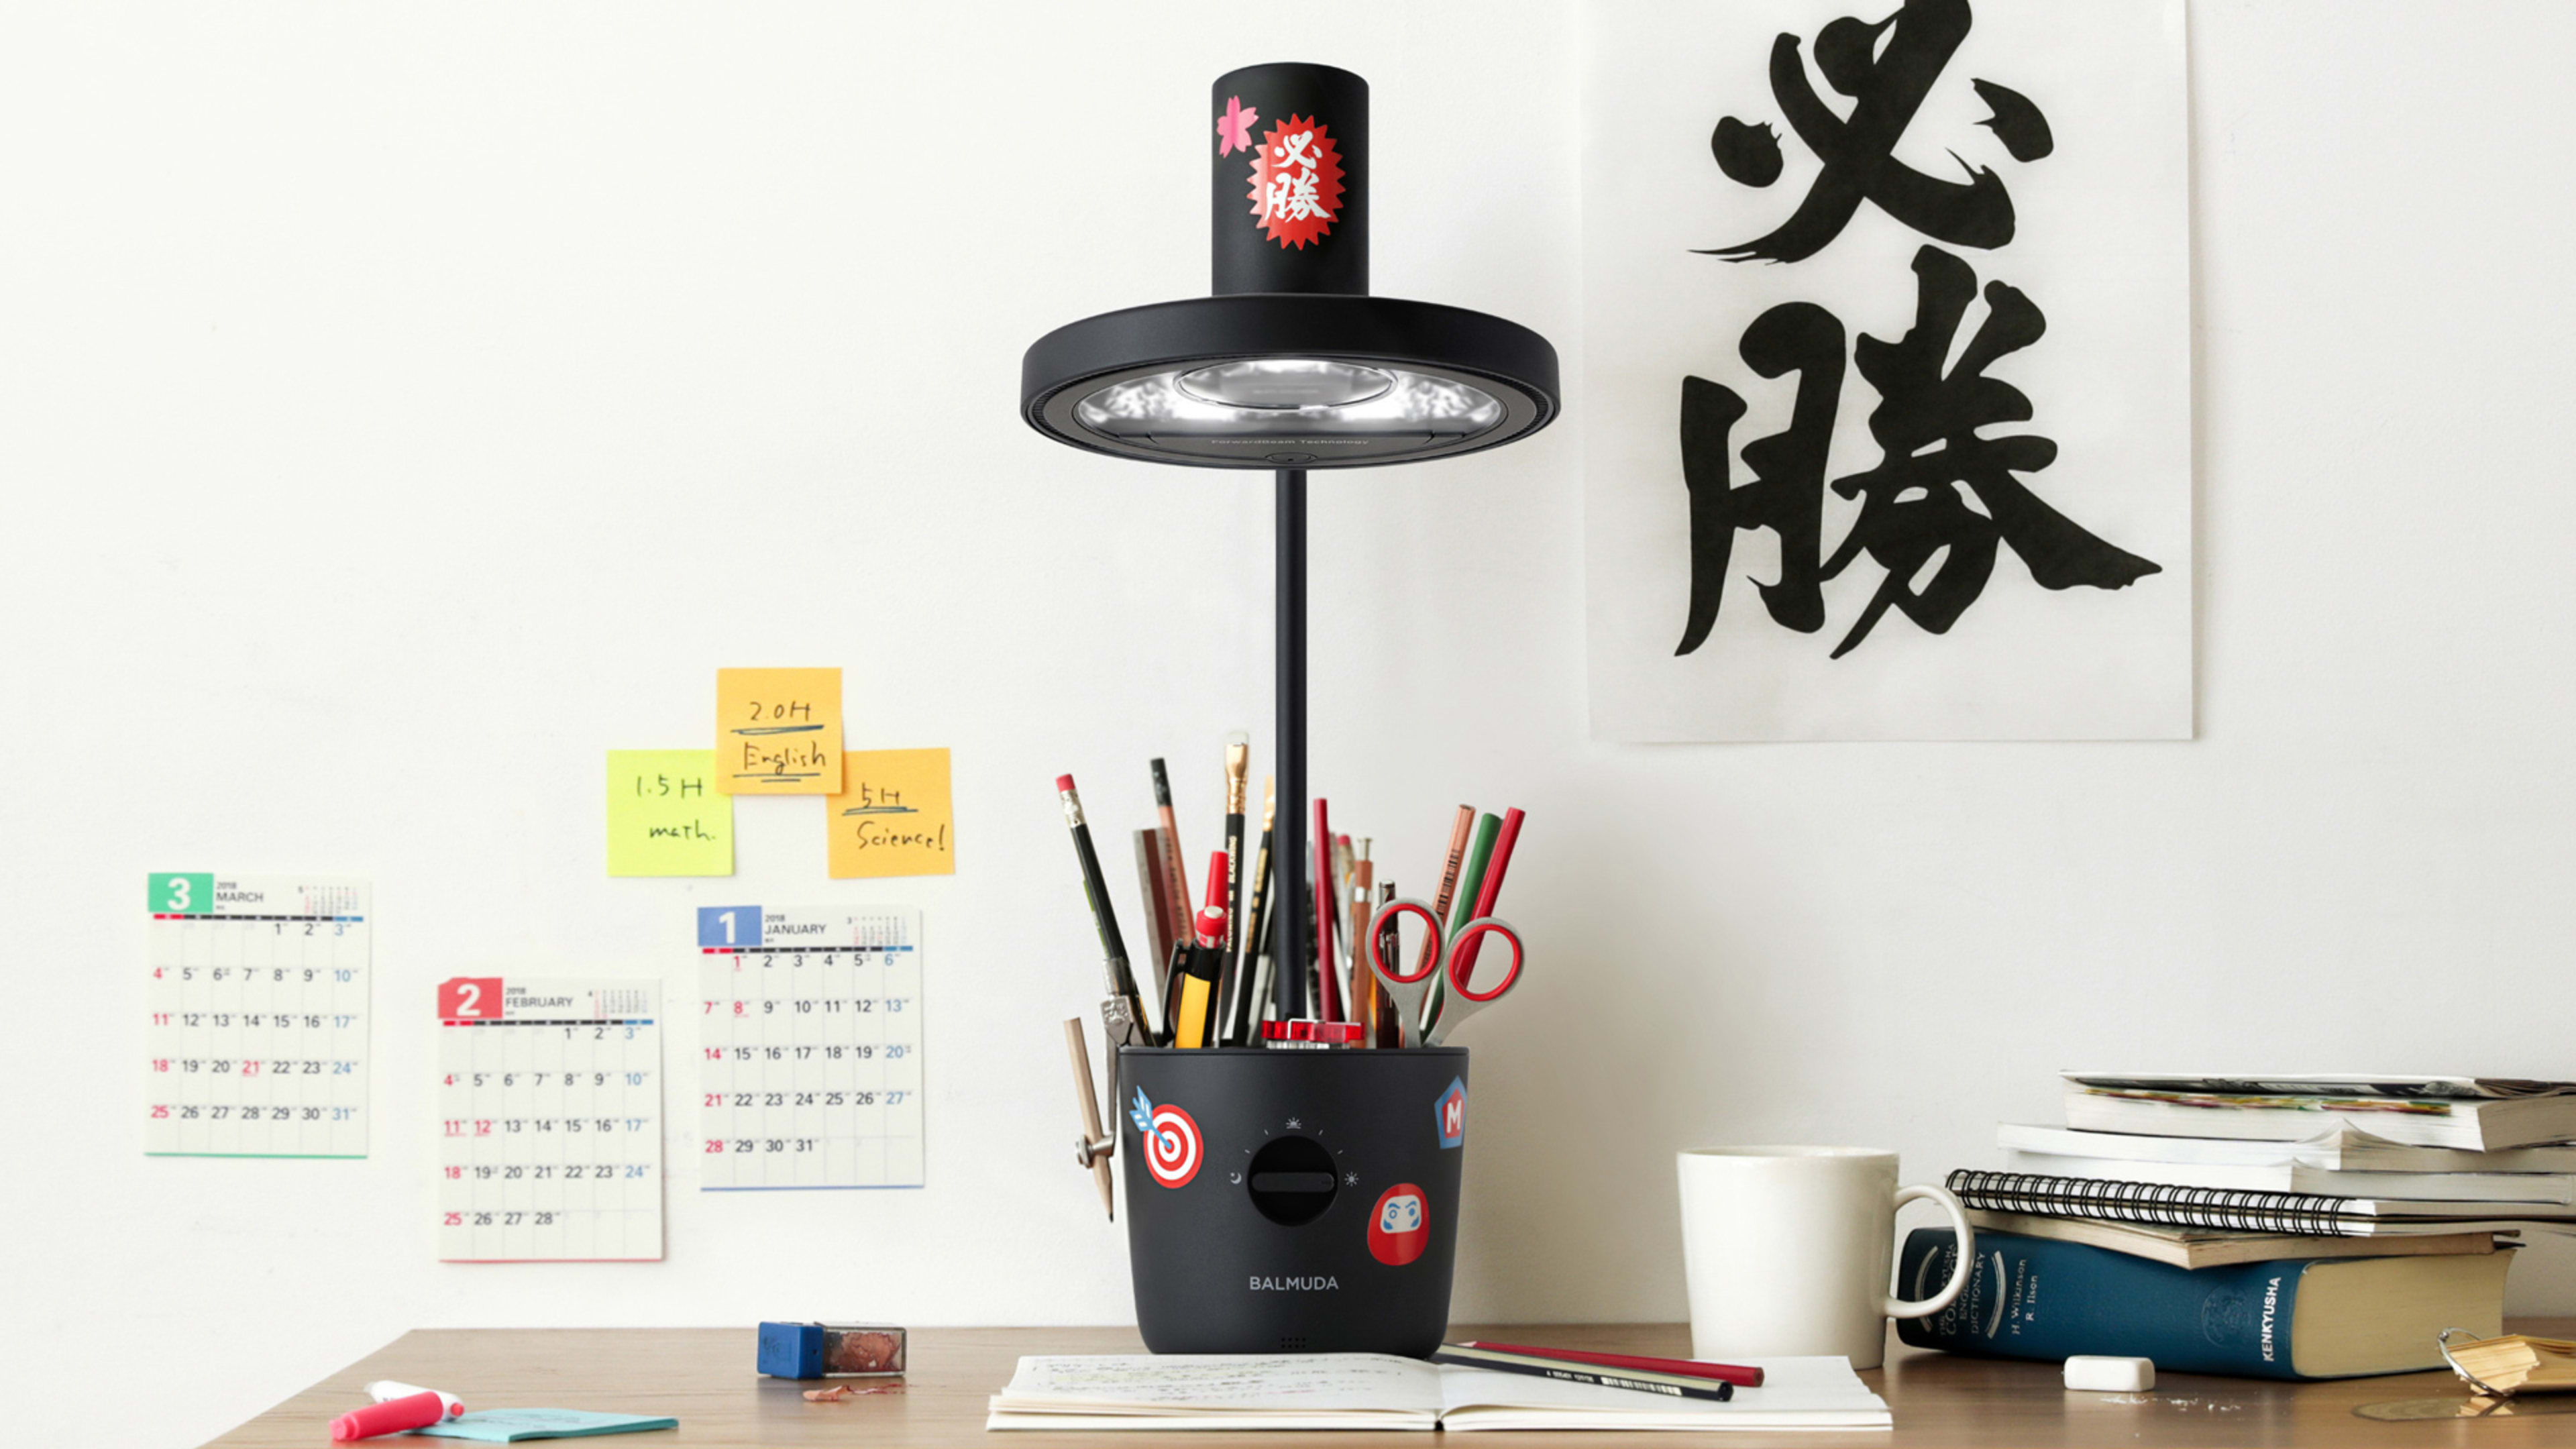 This clever lamp uses surgeon’s tech to eliminate annoying shadows